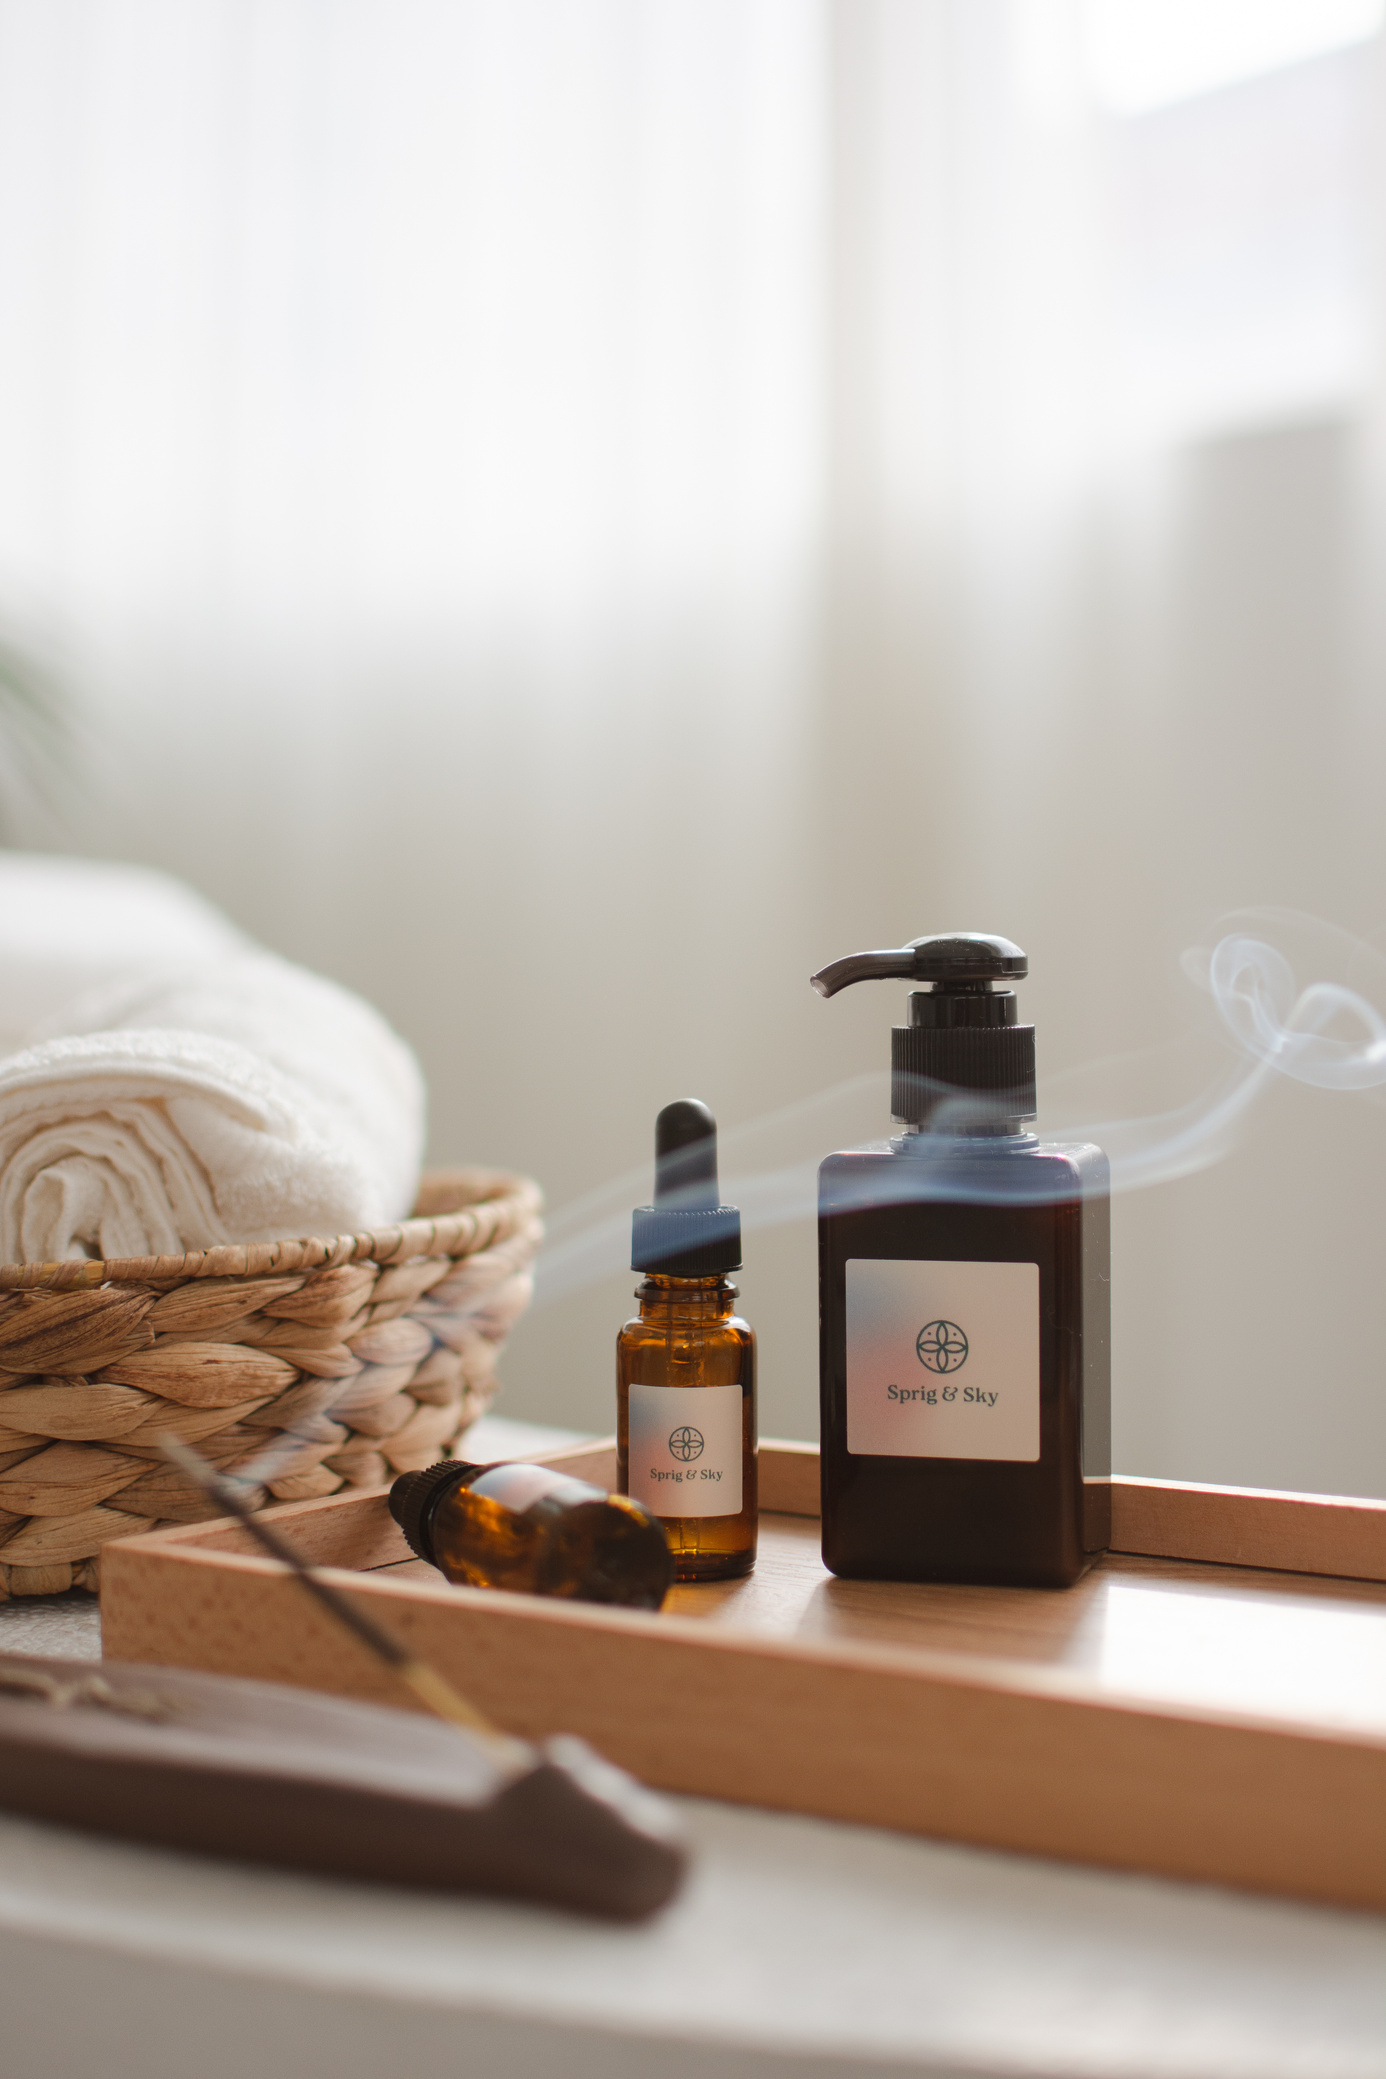 Incense and Skincare Products 